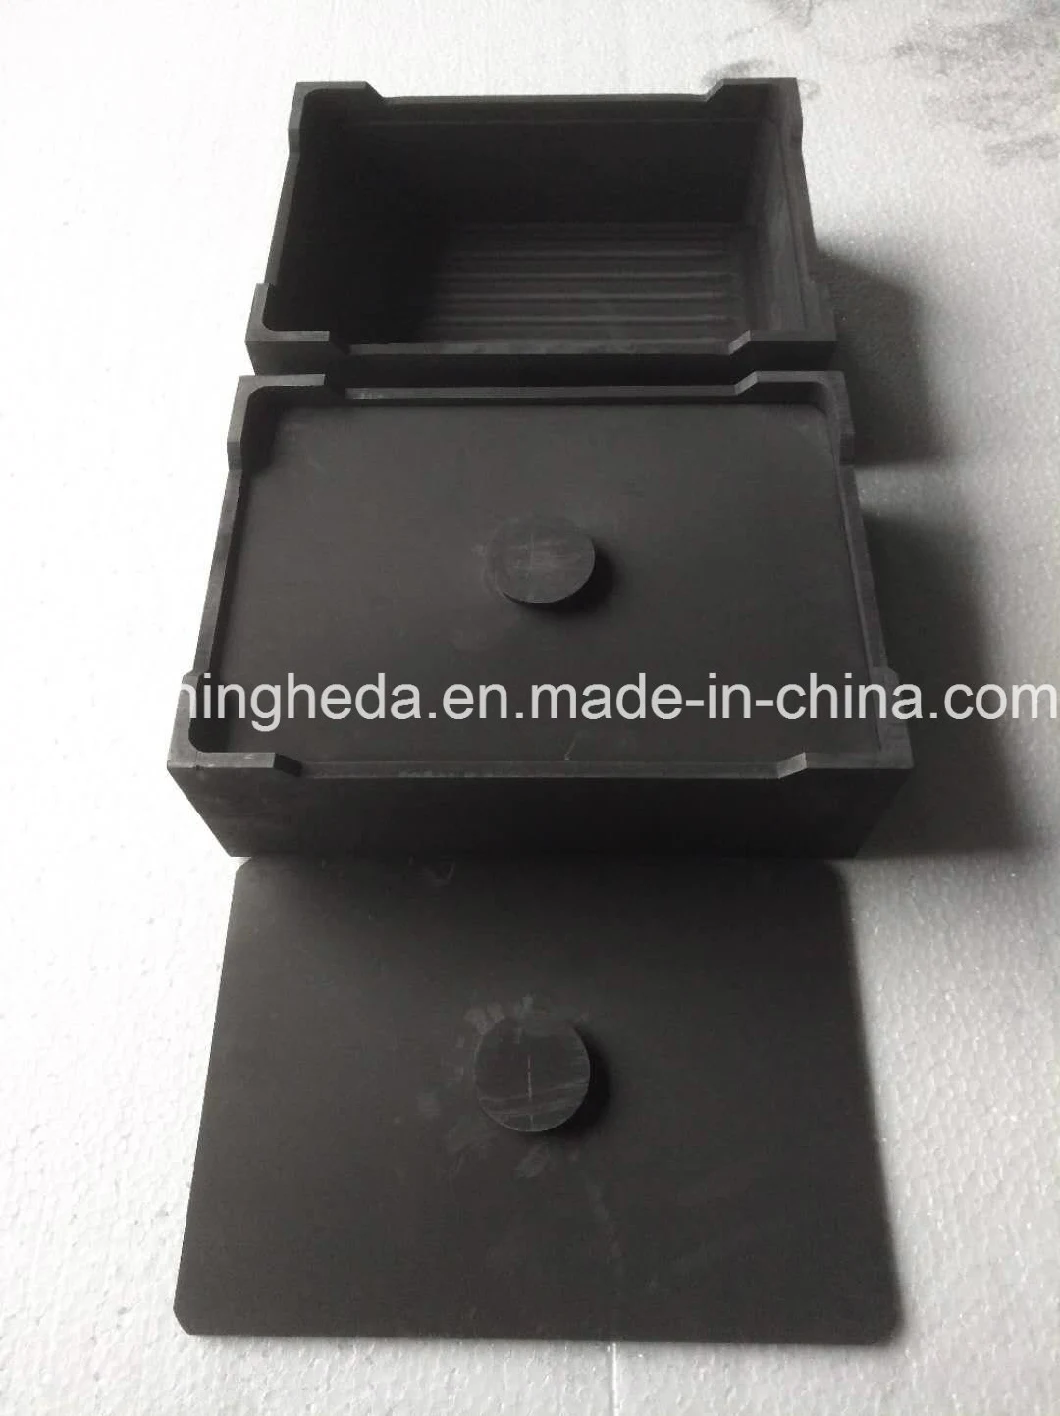 High Density Graphite Boat for High Temperature Sintering in Vacuum Furnace